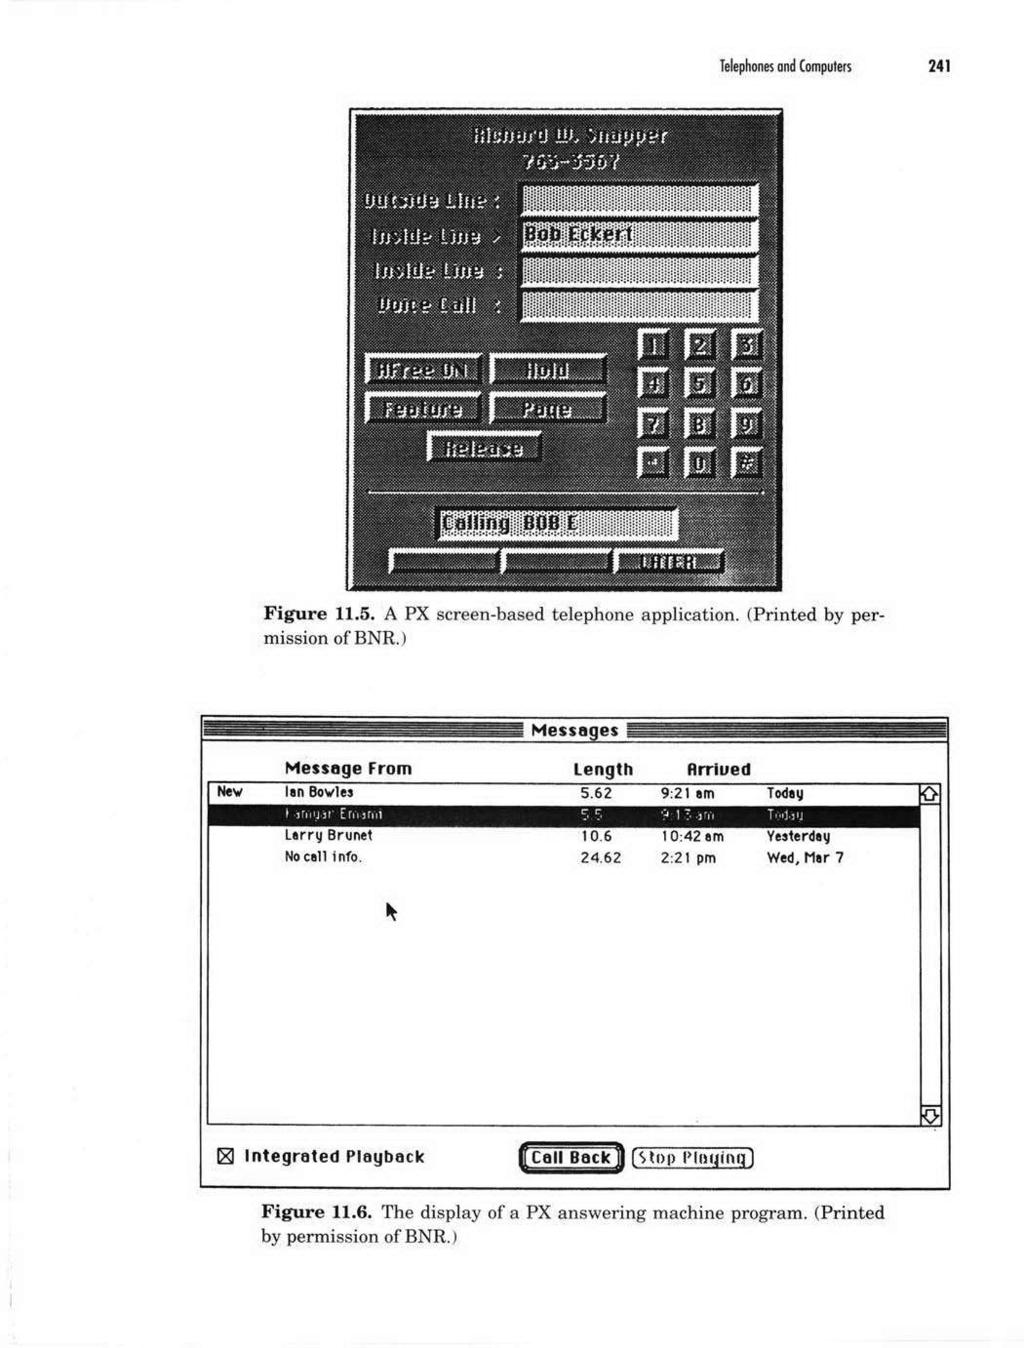 Telephons and lpulers 241 Figure 11.5. A PX screen-based telephone application. (Printed by permission of BNR.) Courtesy of Nortel Networks. Used with permission.